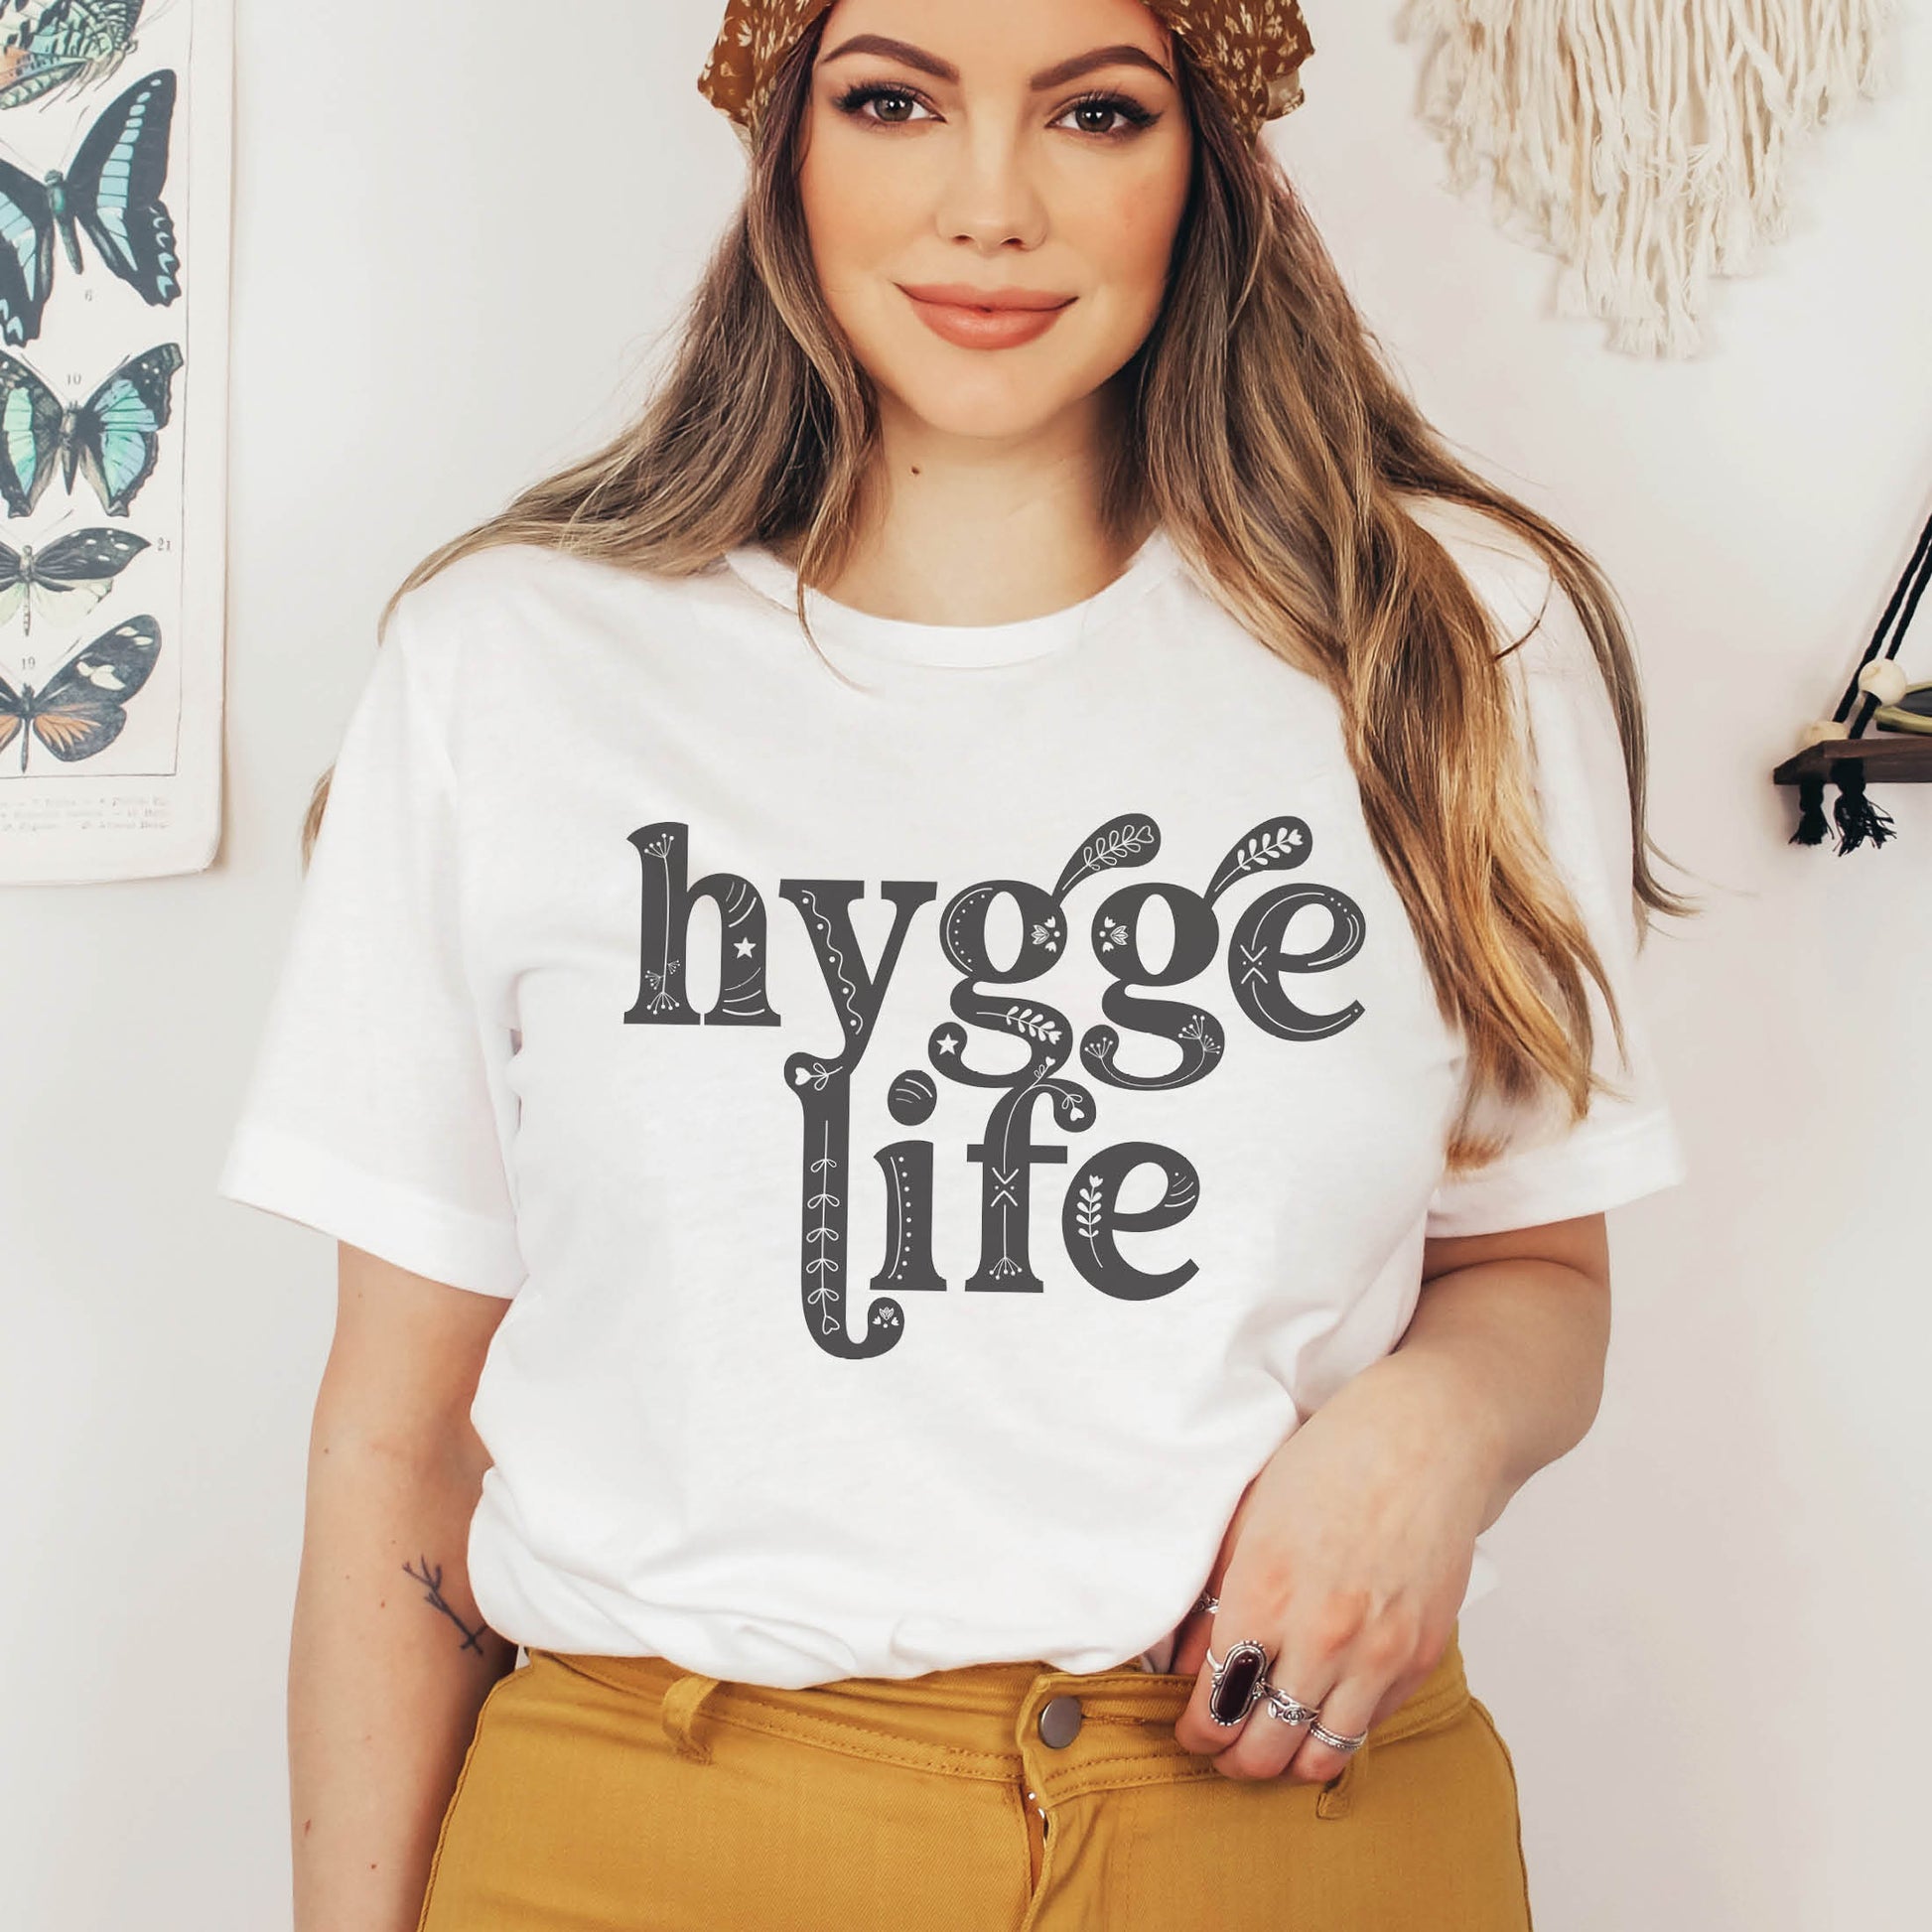 Coziness vibes boho woman wearing a white and gray Hygge Life Holy Hygge Women's unisex Christian t-shirt with Scandinavian floral and heart art for the cozy fall and winter season